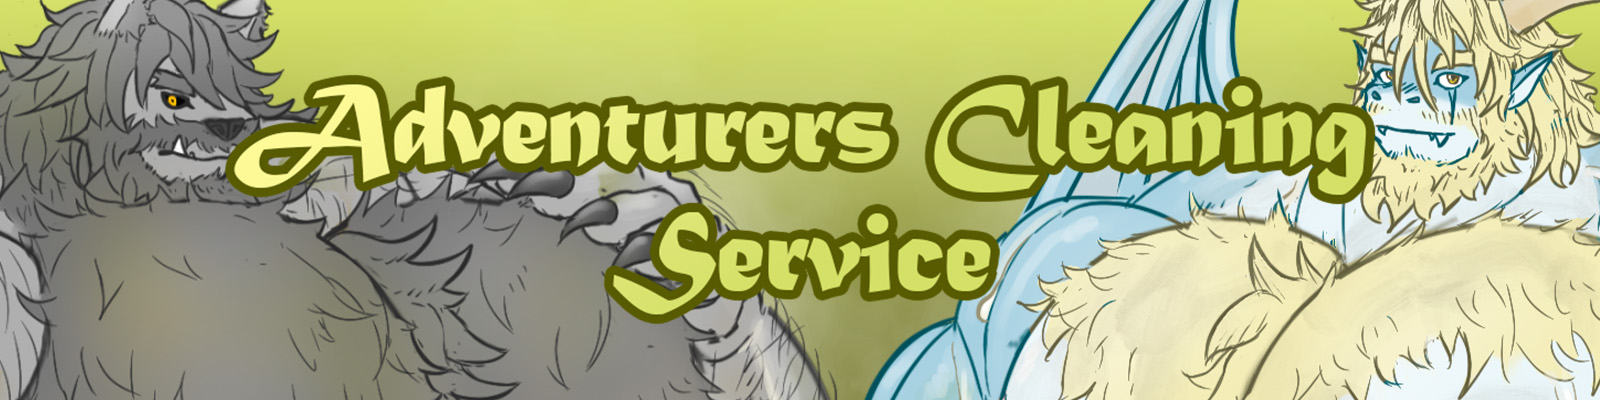 Adventurers Cleaning Service